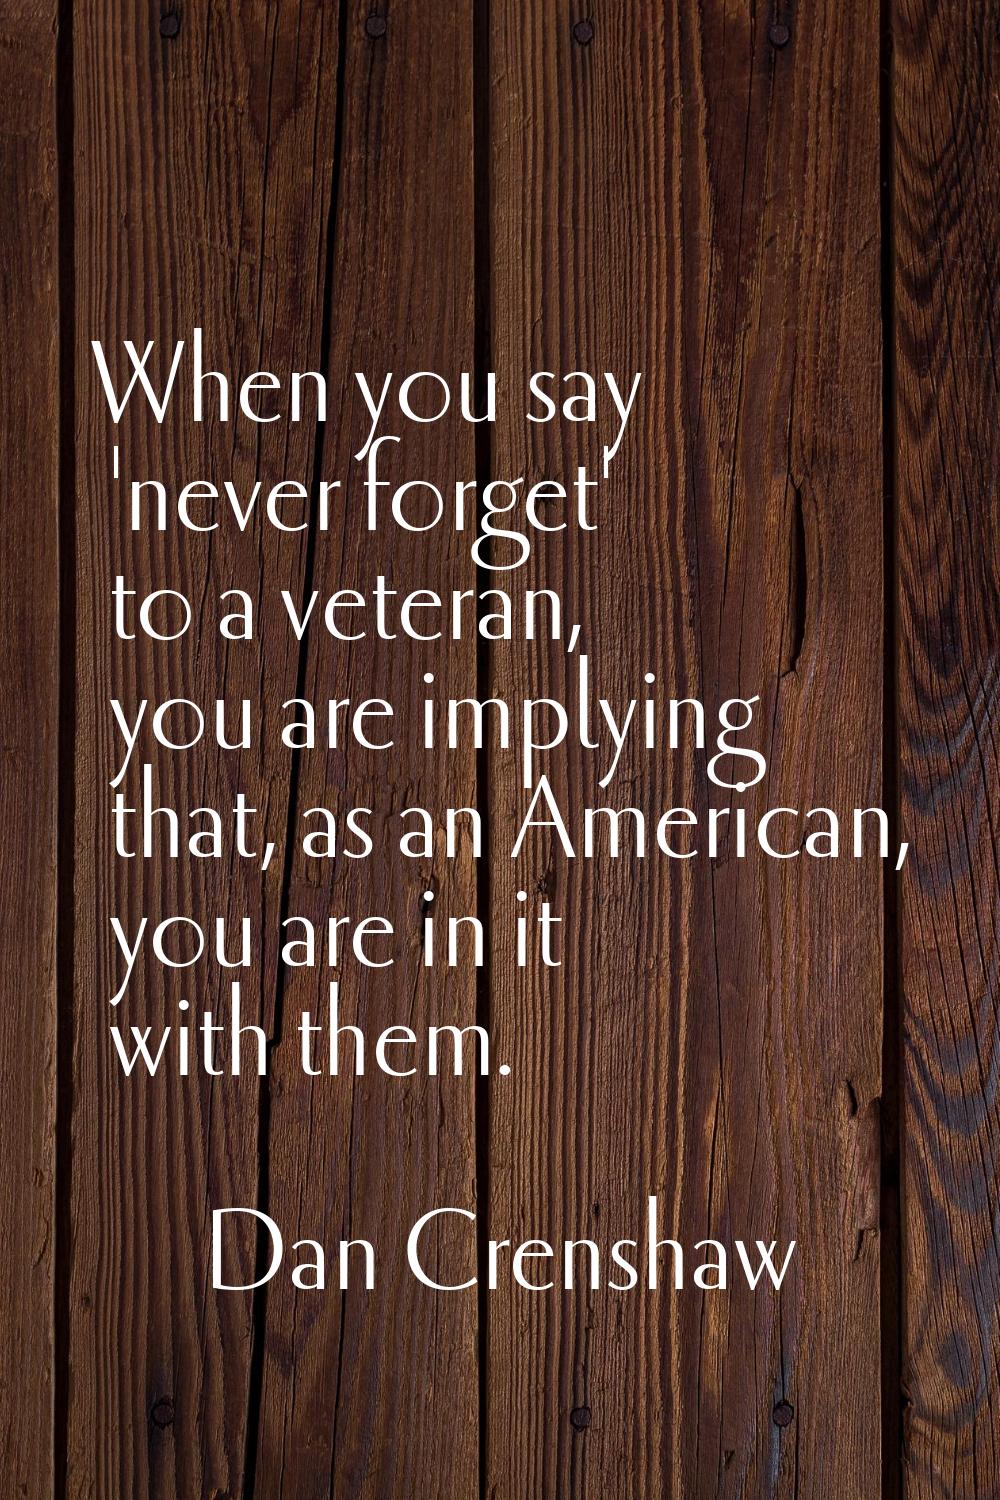 When you say 'never forget' to a veteran, you are implying that, as an American, you are in it with